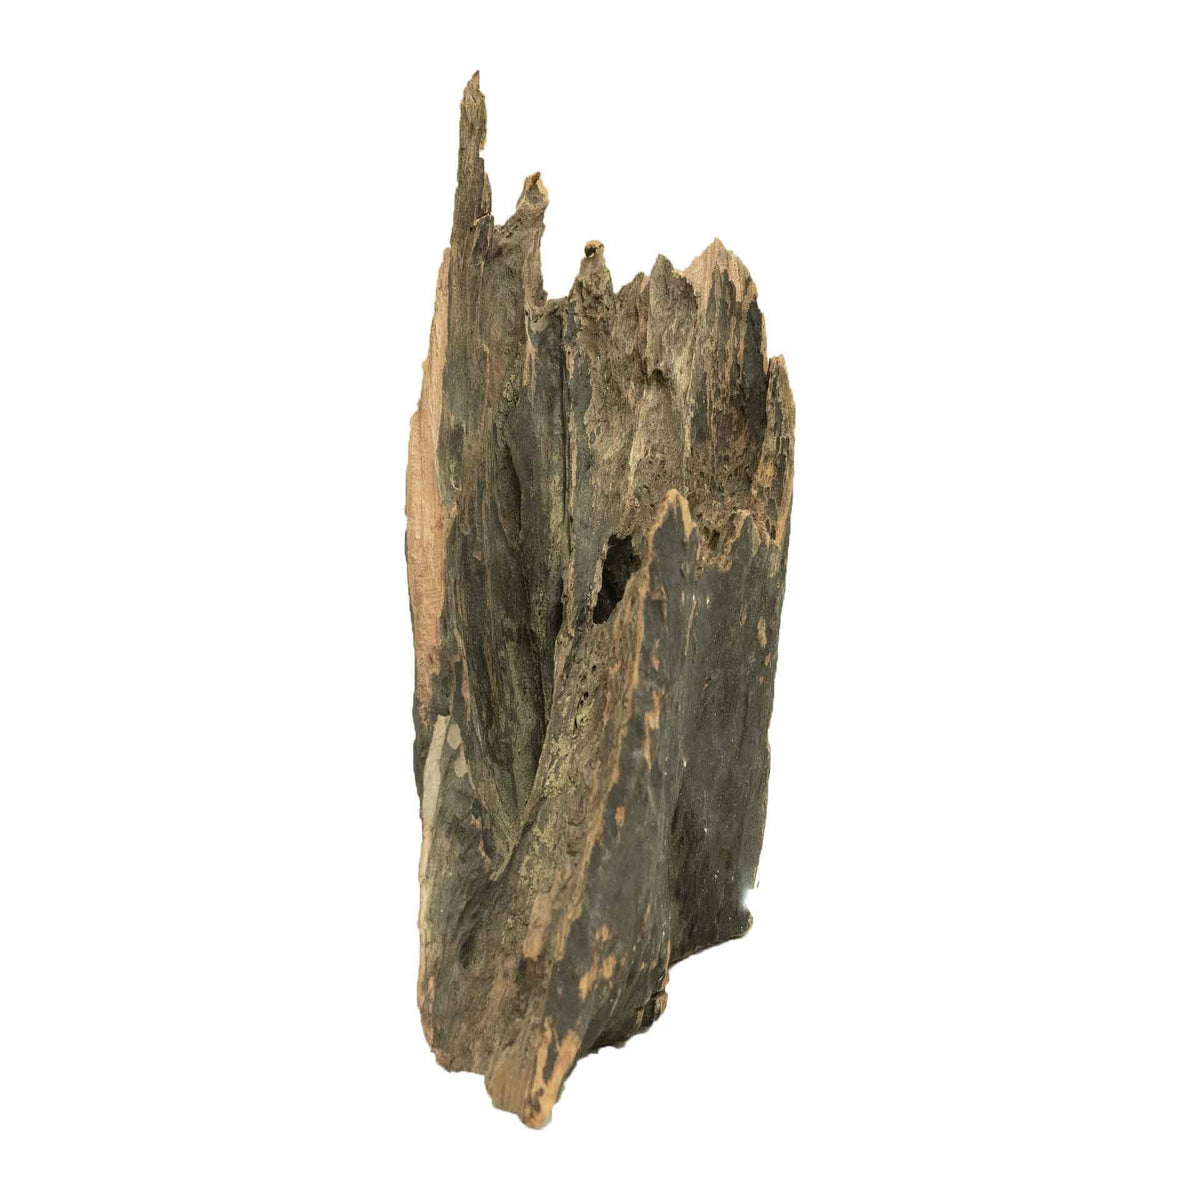 Dalua Dragon Wood Medium - In Store Pick Up Only